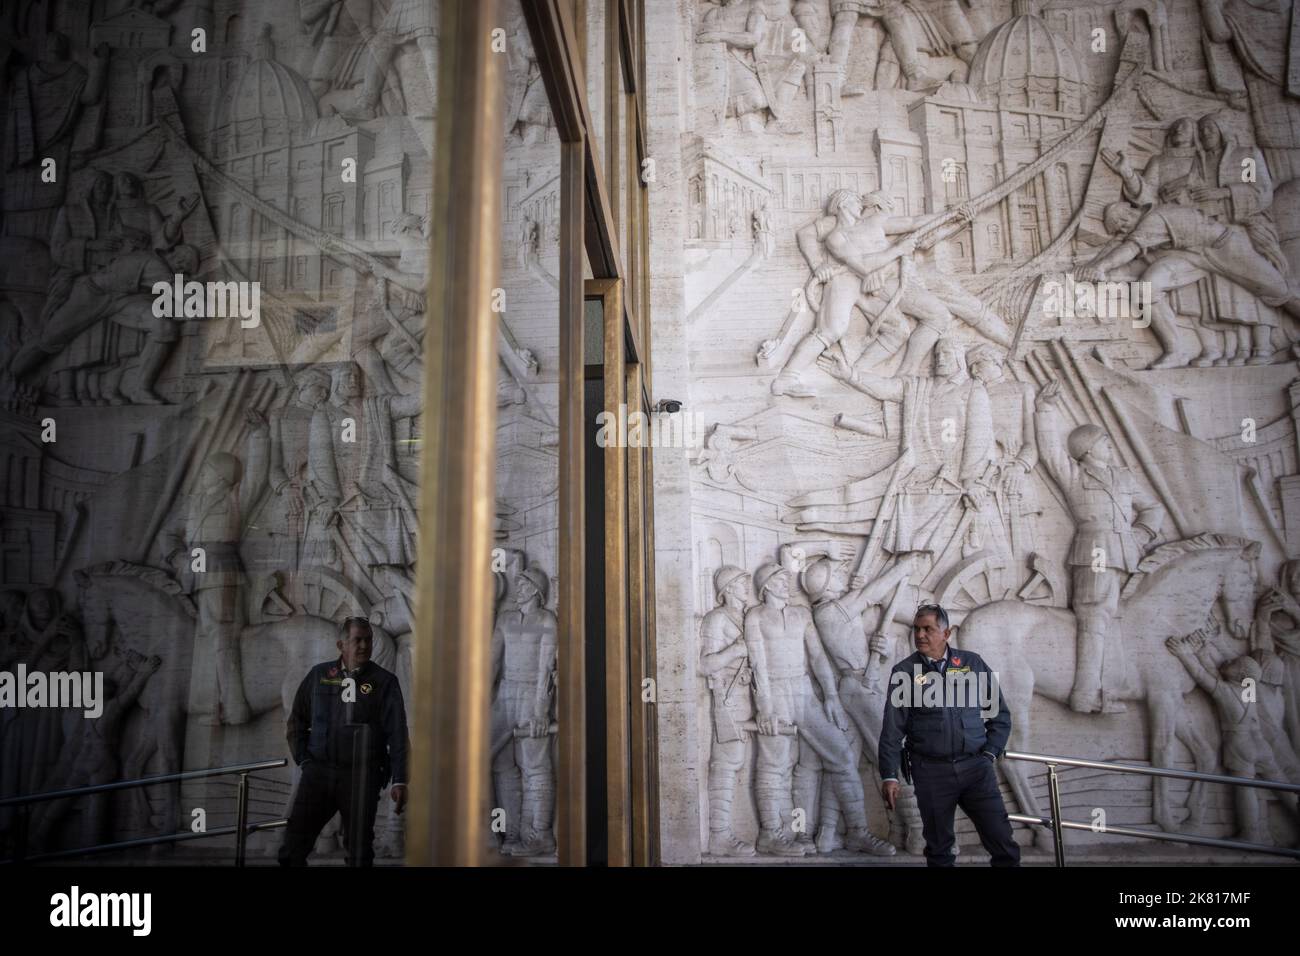 Rom, Italy. 19th Oct, 2022. An employee of a security company stands in front of the entrance of the Palazzo degli Uffici in front of a relief by artist Publio Morbiducci that shows, among others, former Italian dictator Mussolini sitting on a horse. (to dpa 'Ahead of 100th anniversary of the seizure of power by the fascists in Italy') Credit: Oliver Weiken/dpa/Alamy Live News Stock Photo